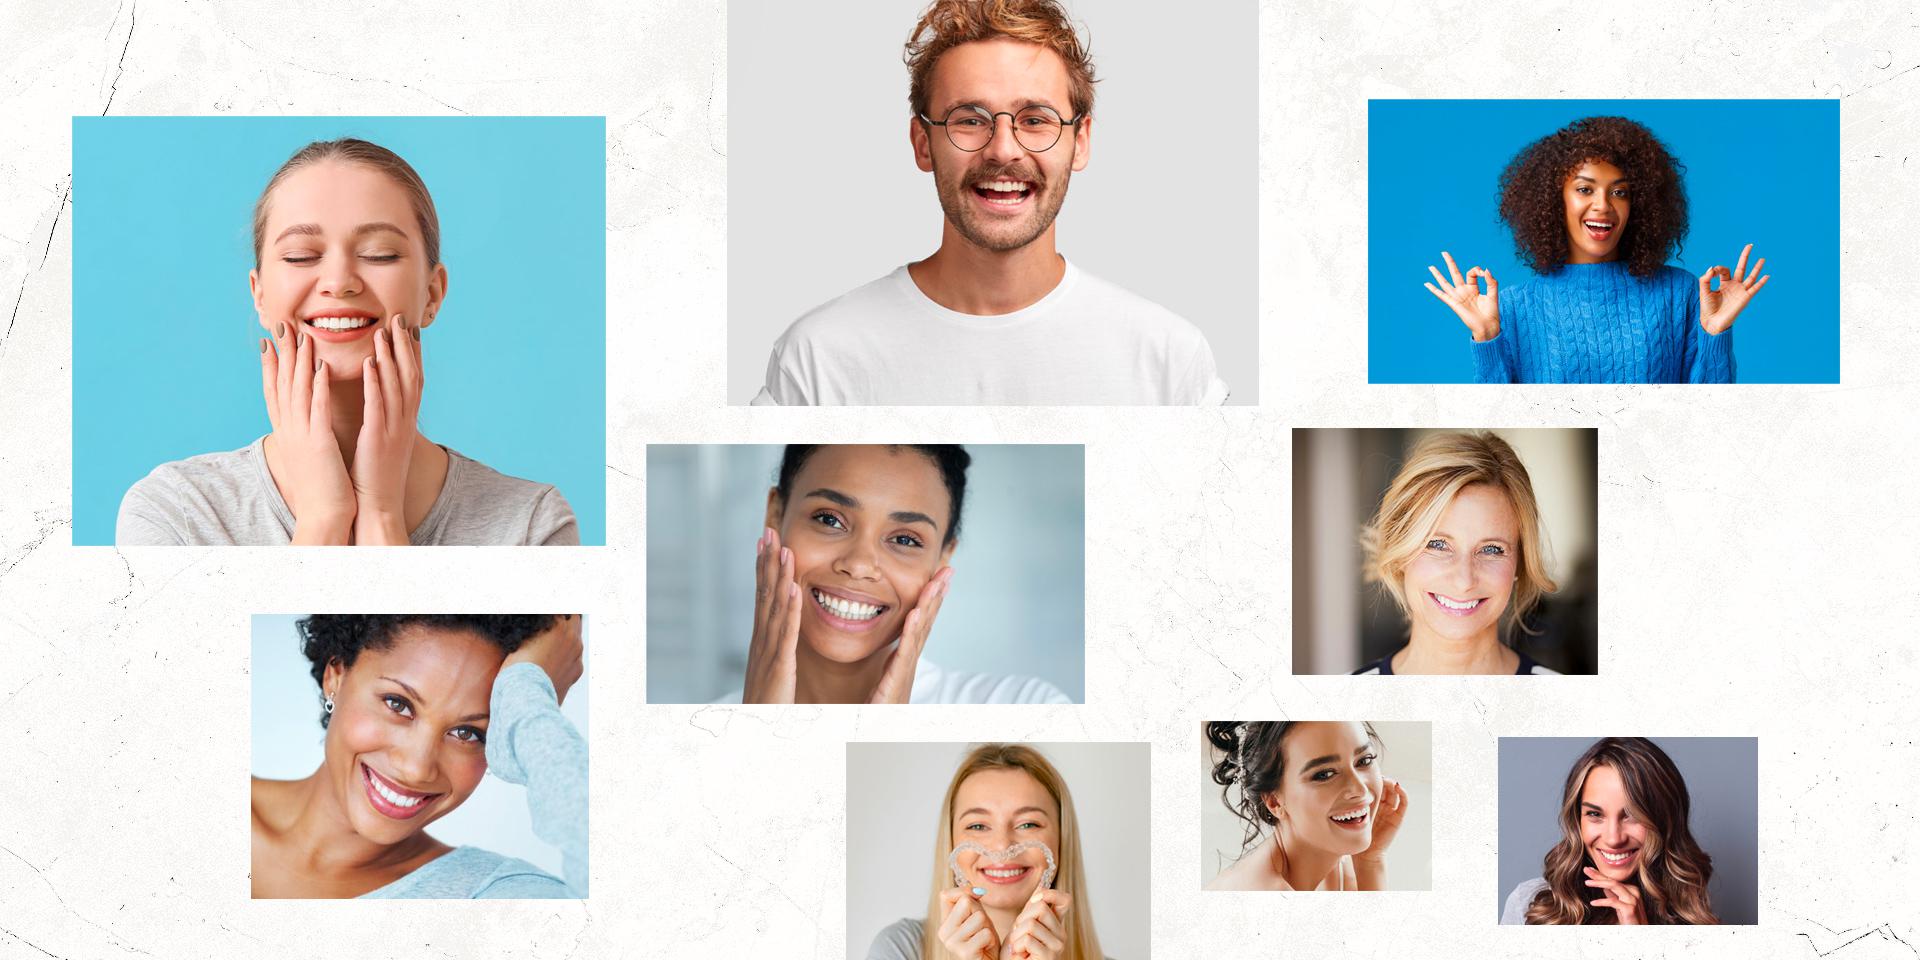 Achieving Overall Wellness with Invisalign at Monahan Dental and Implant Center